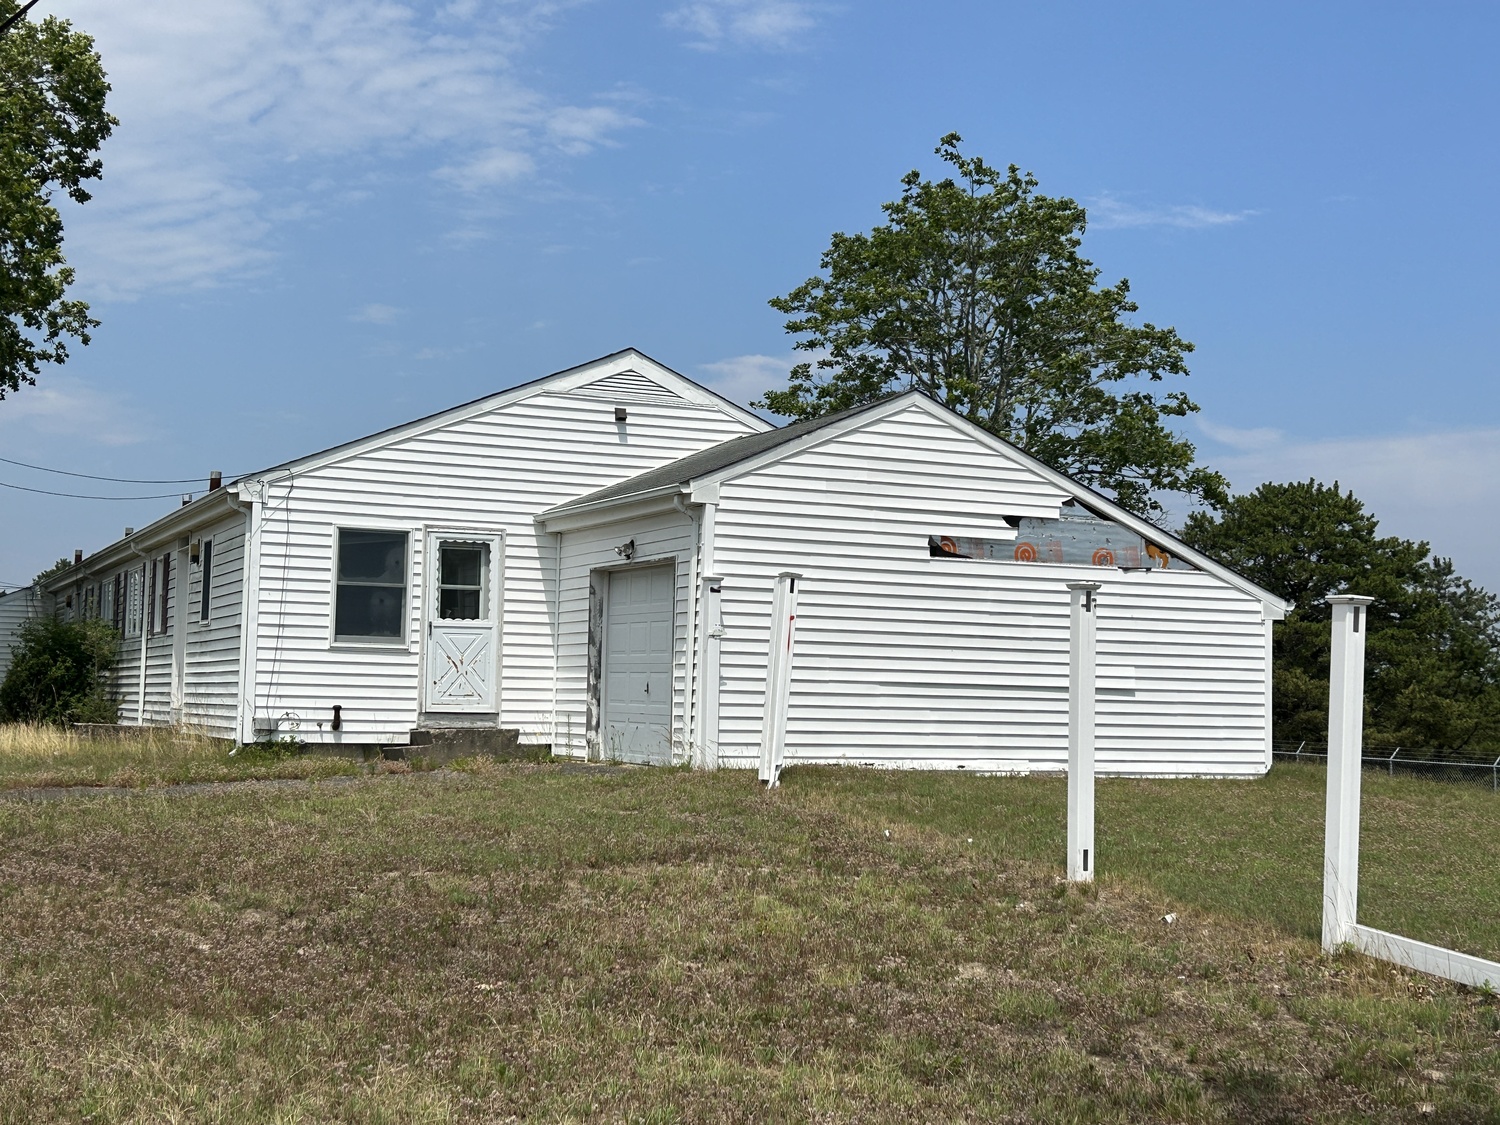 One of the Coast Guard housing units included in the upcoming auction of the 14-acre property in Westhampton.   KITTY MERRILL